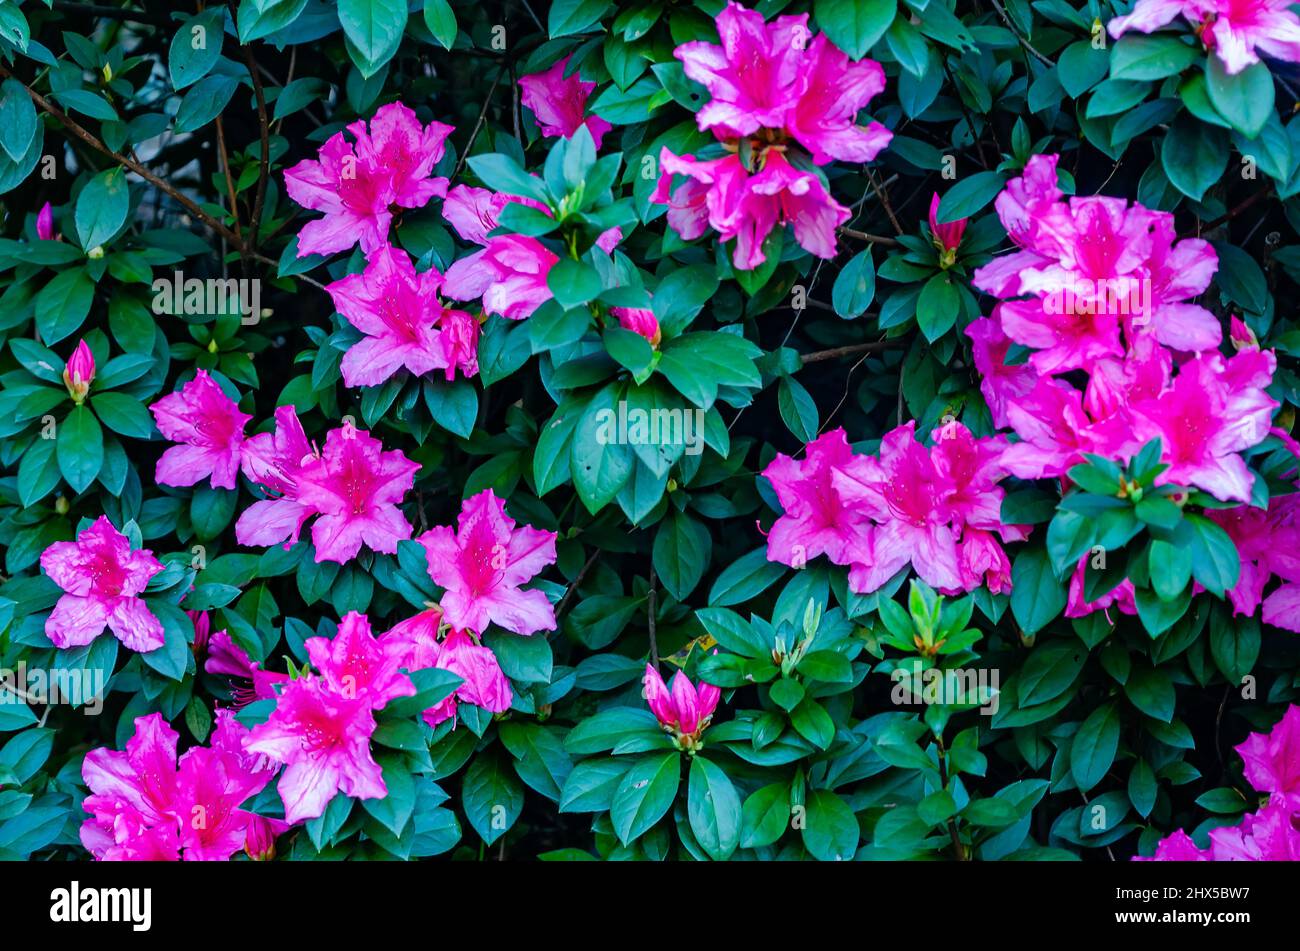 Southern Indian azaleas (Rhododendron) bloom at Bellingrath Gardens, March 4, 2022, in Theodore, Alabama. Stock Photo